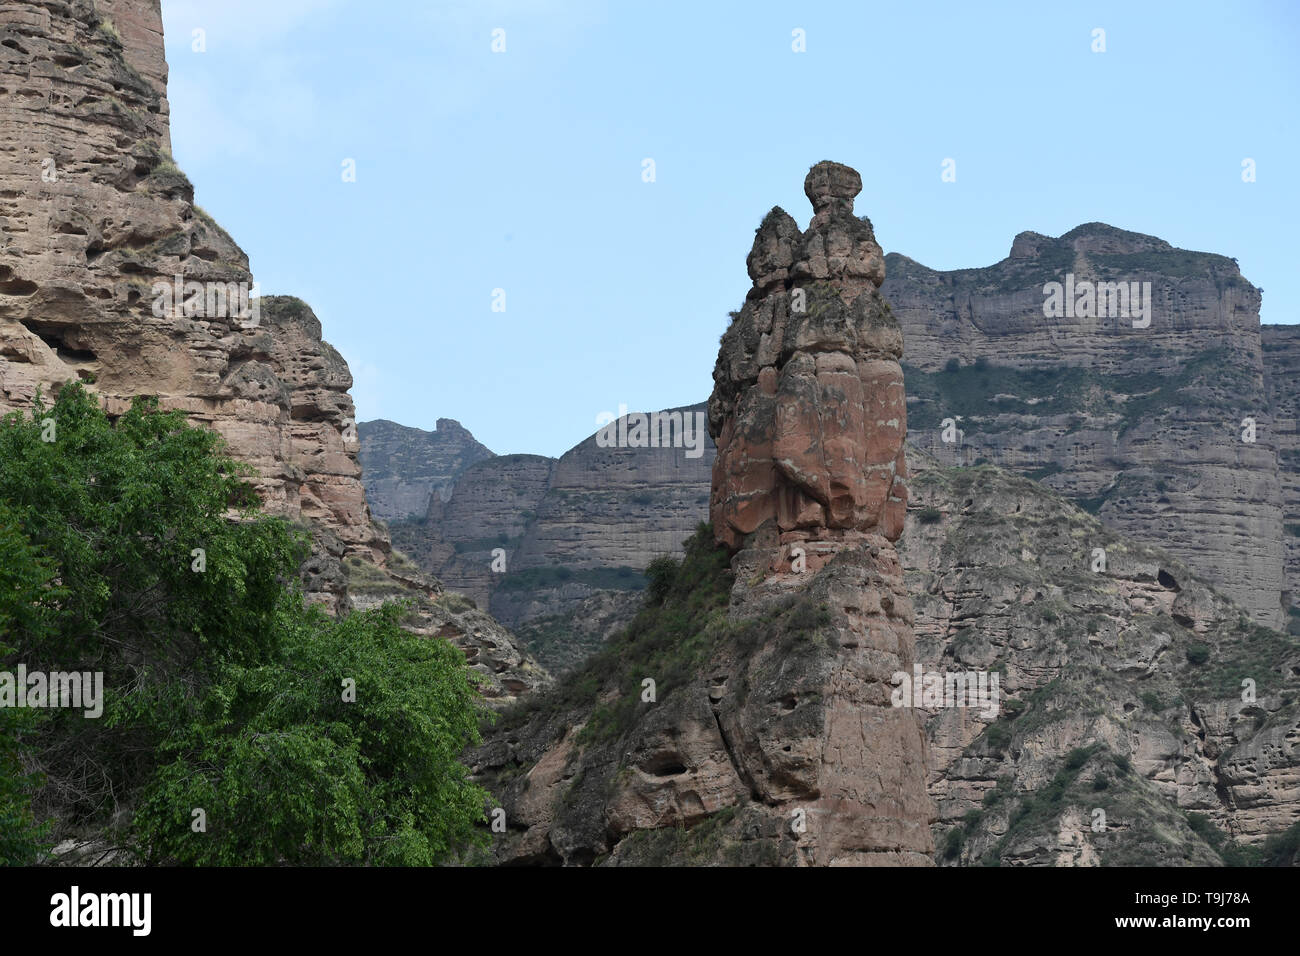 Yongjing. 18th May, 2019. Photo taken on May 18, 2019 shows a stone forest at Bingling Danxia National Geological Park in Yongjing County, northwest China's Gansu Province. Danxia landform is a unique type of landscapes formed from red sandstone and characterized by steep cliffs. Credit: Fan Peishen/Xinhua/Alamy Live News Stock Photo